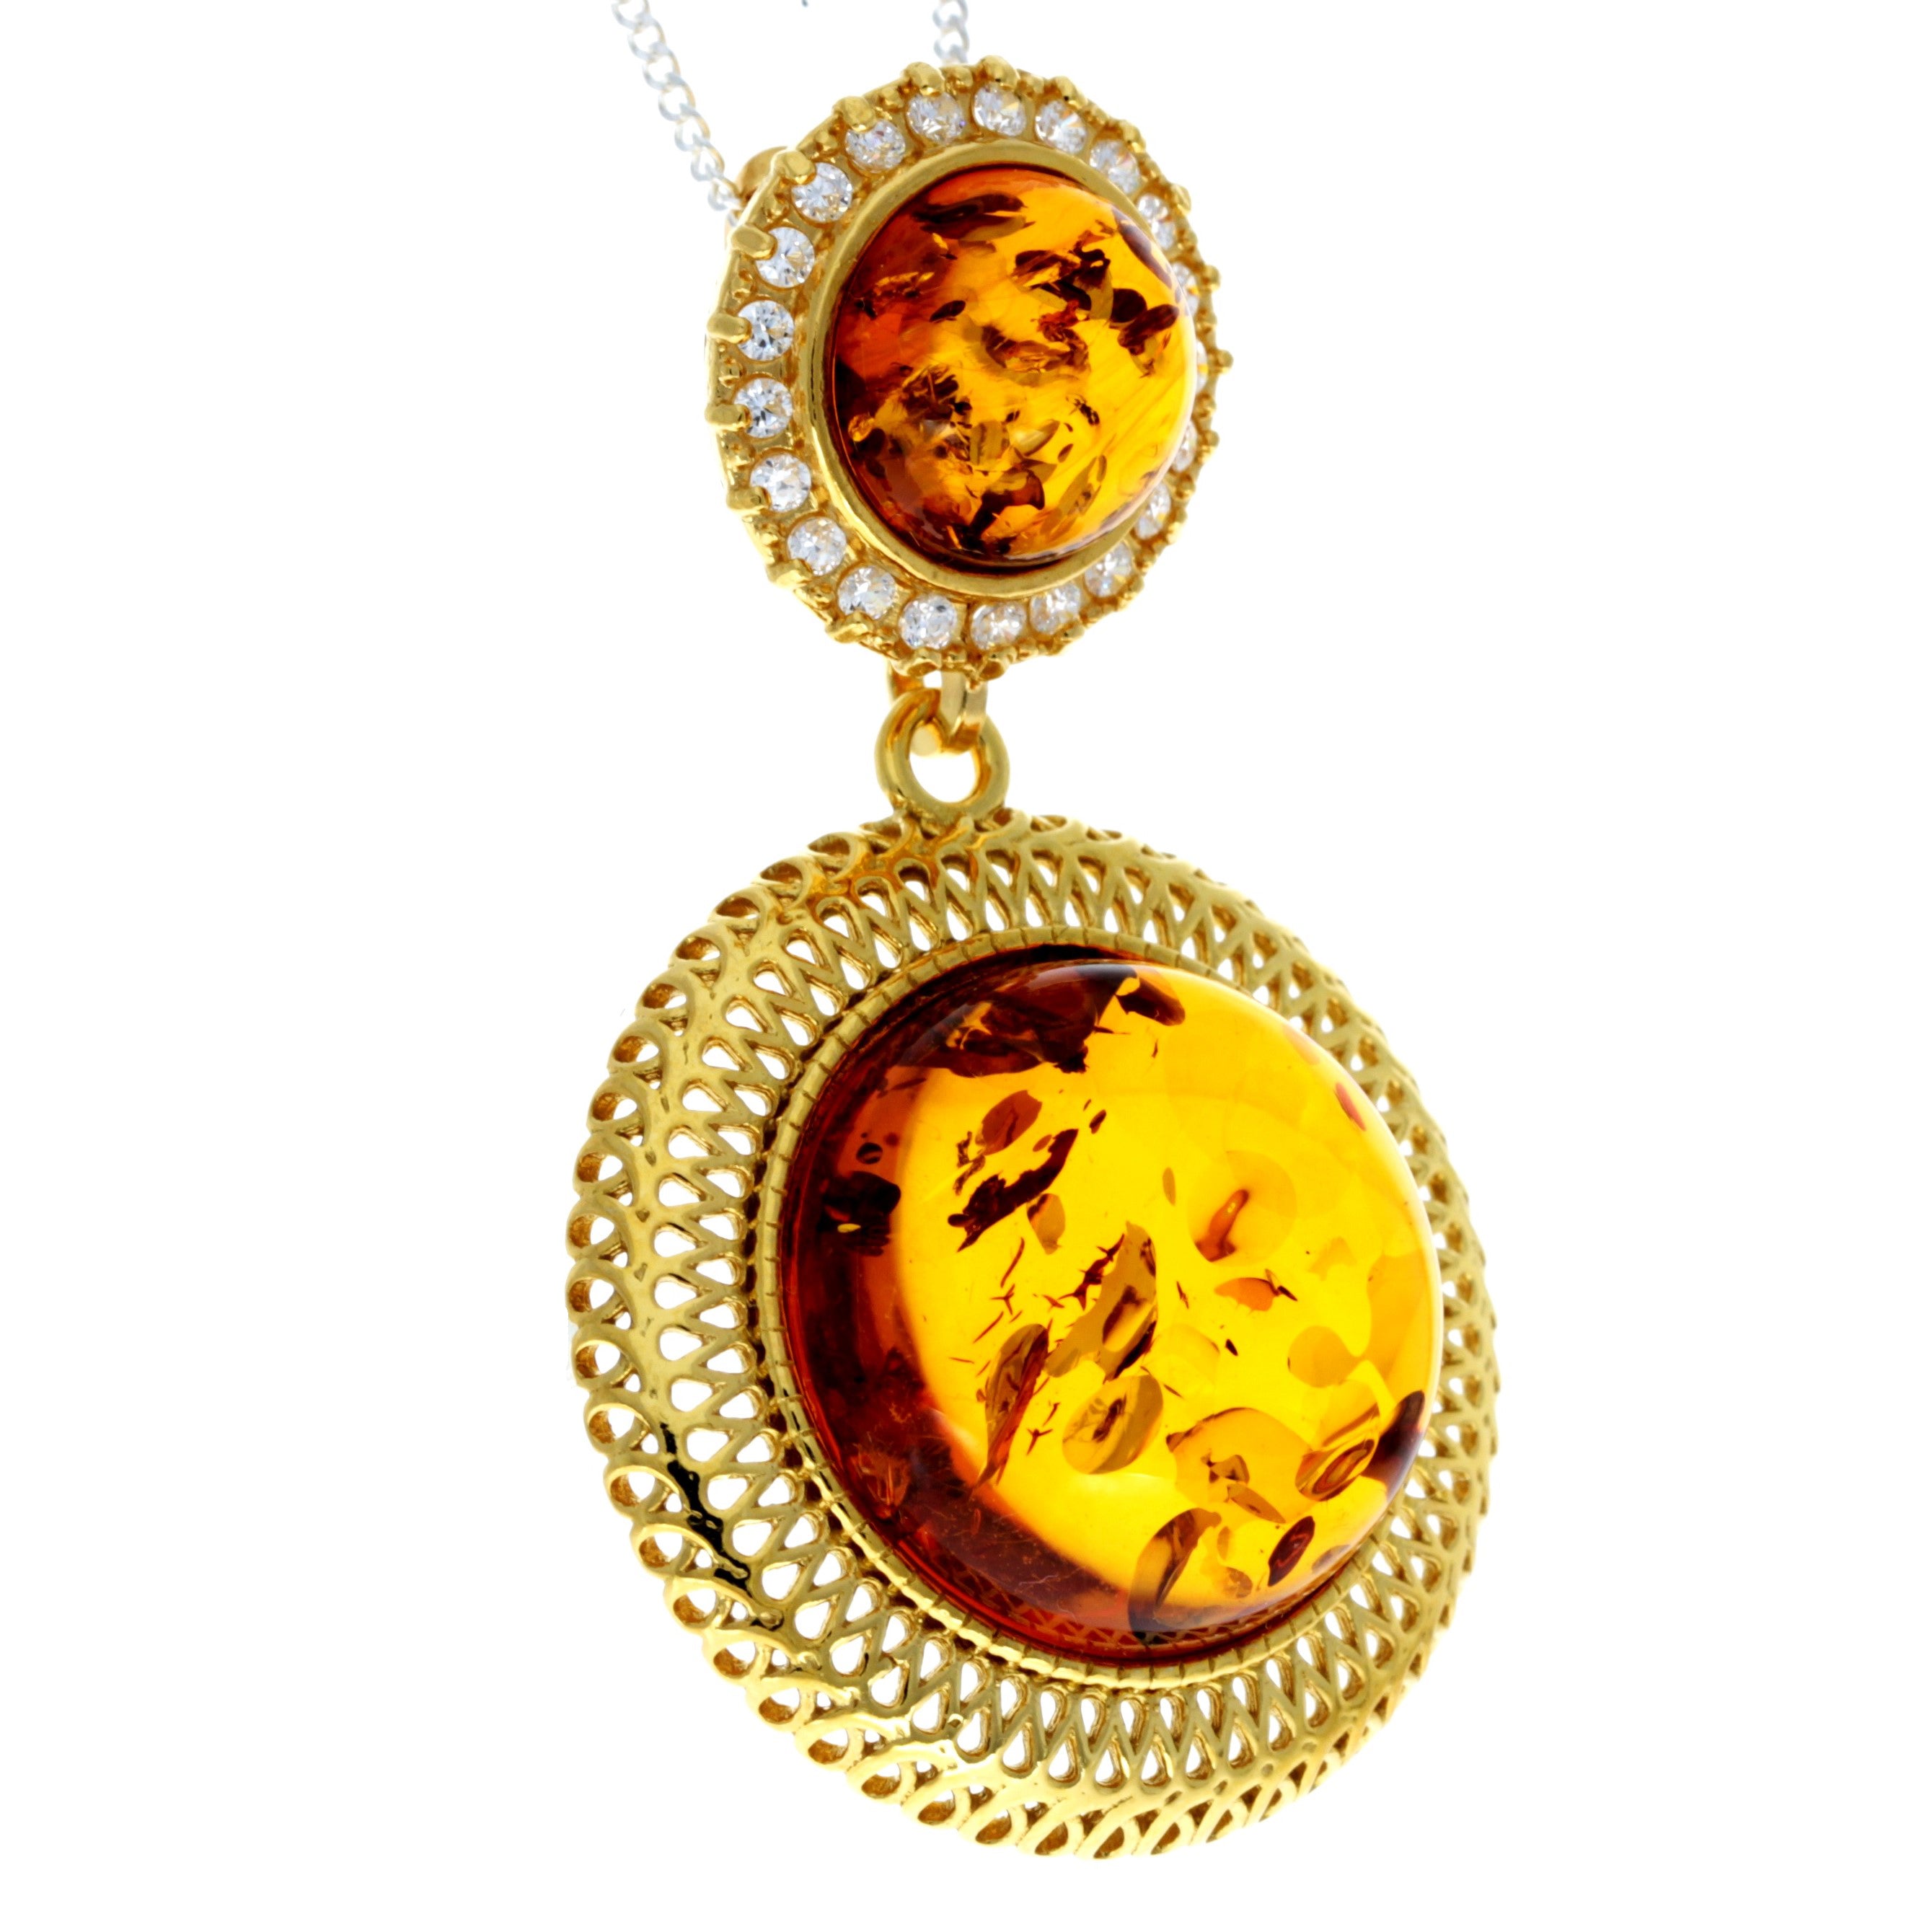 925 Sterling Silver 22 Carat Gold Plated with Genuine Baltic Amber Modern Pendant - MG200